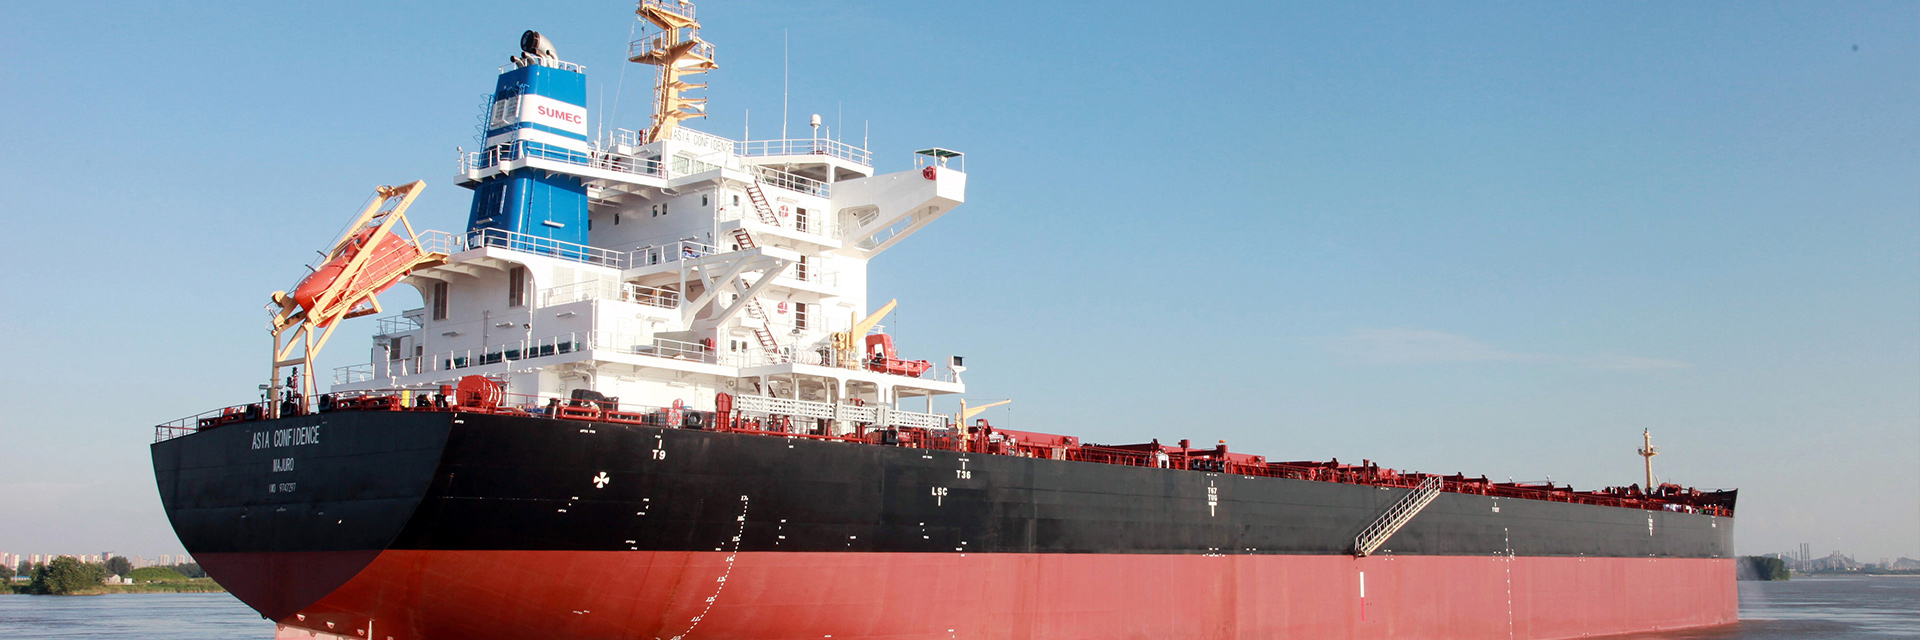 Providing Systematic Solutions for Transportation and Offshore Projects